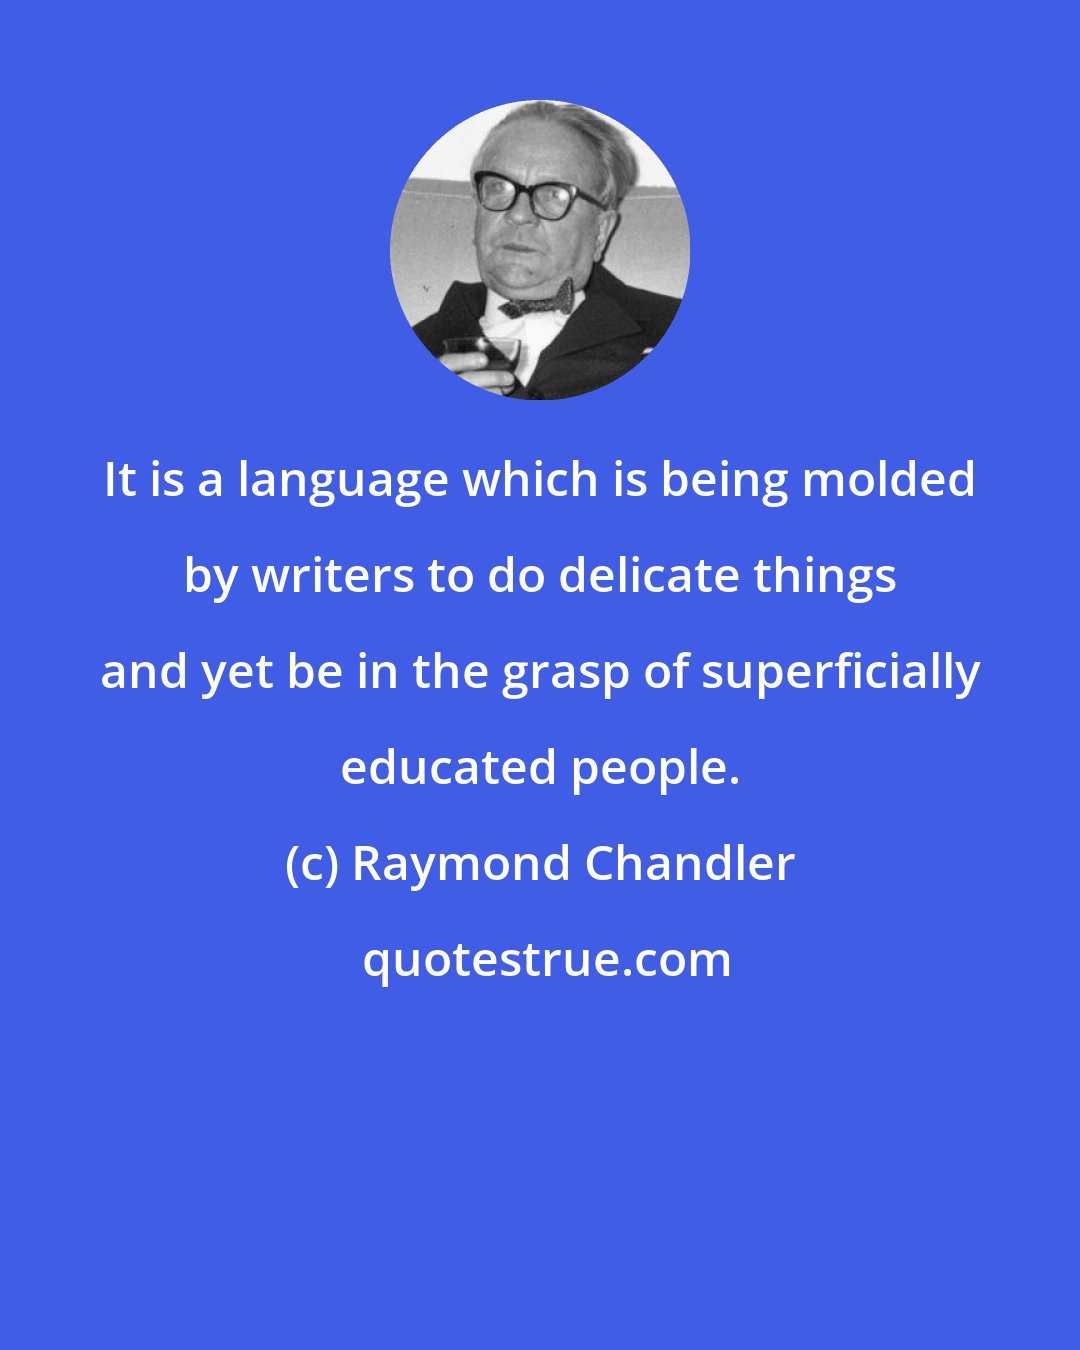 Raymond Chandler: It is a language which is being molded by writers to do delicate things and yet be in the grasp of superficially educated people.